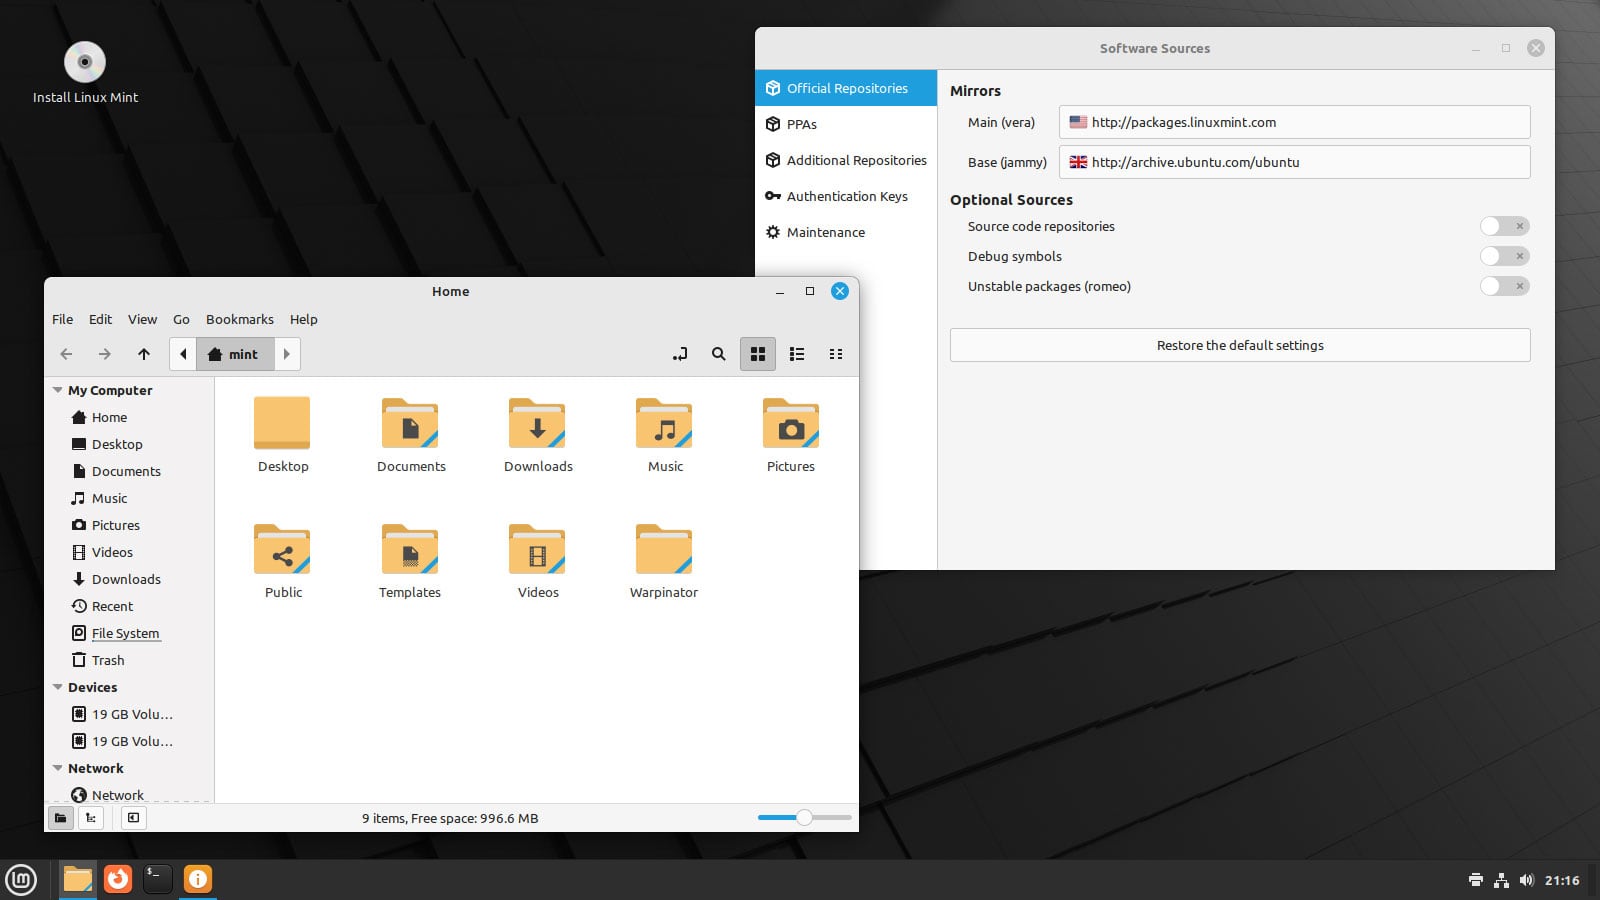 Screenshot of the Linux Mint 21.1 desktop with new folder icons visible in the Nemo file manager